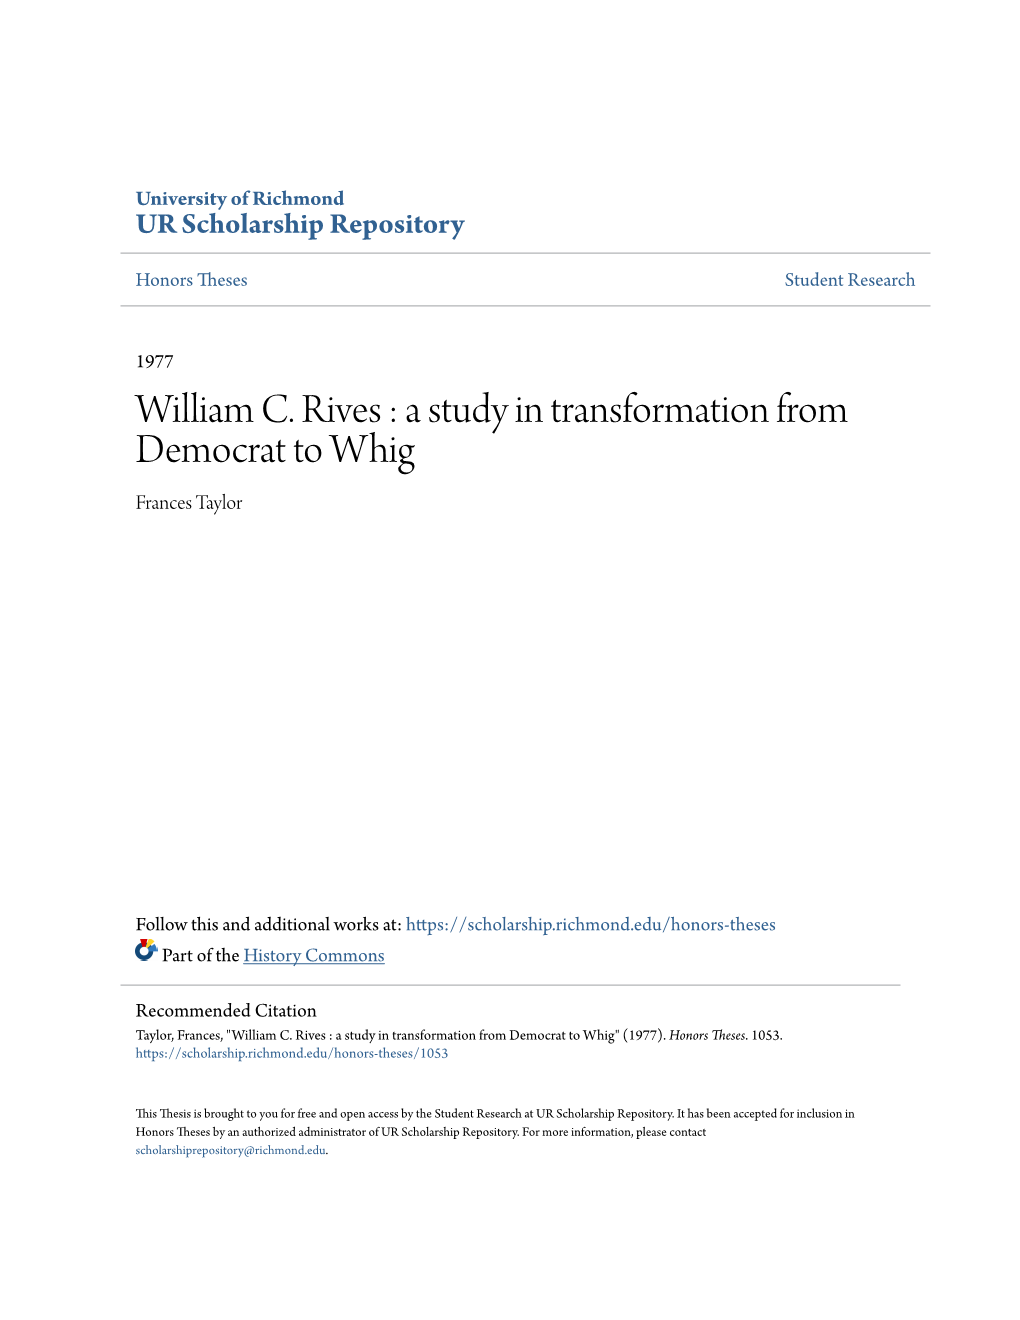 William C. Rives : a Study in Transformation from Democrat to Whig Frances Taylor